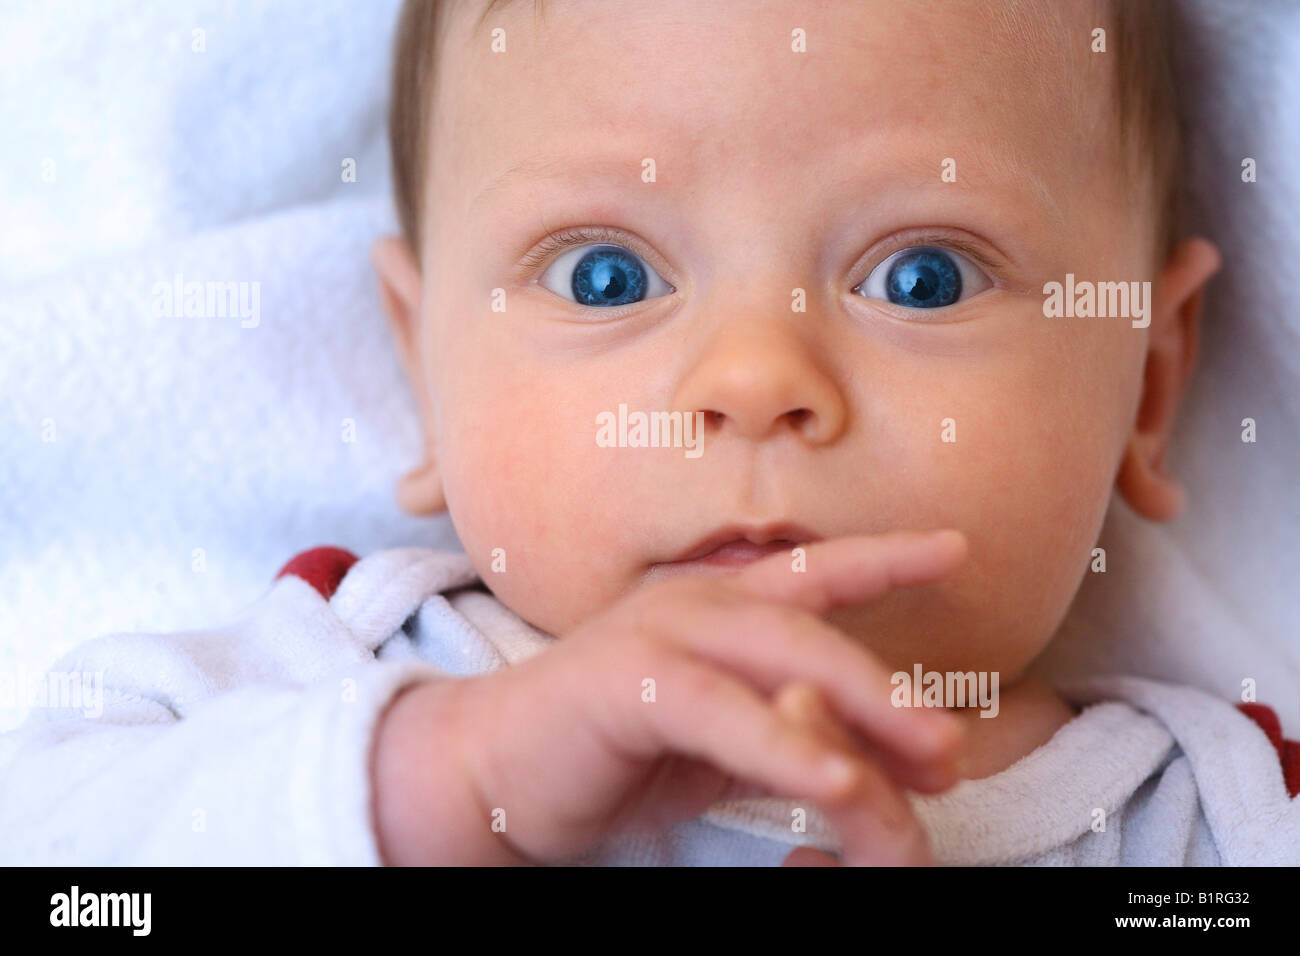 3-week-old baby looking up Stock Photo - Alamy